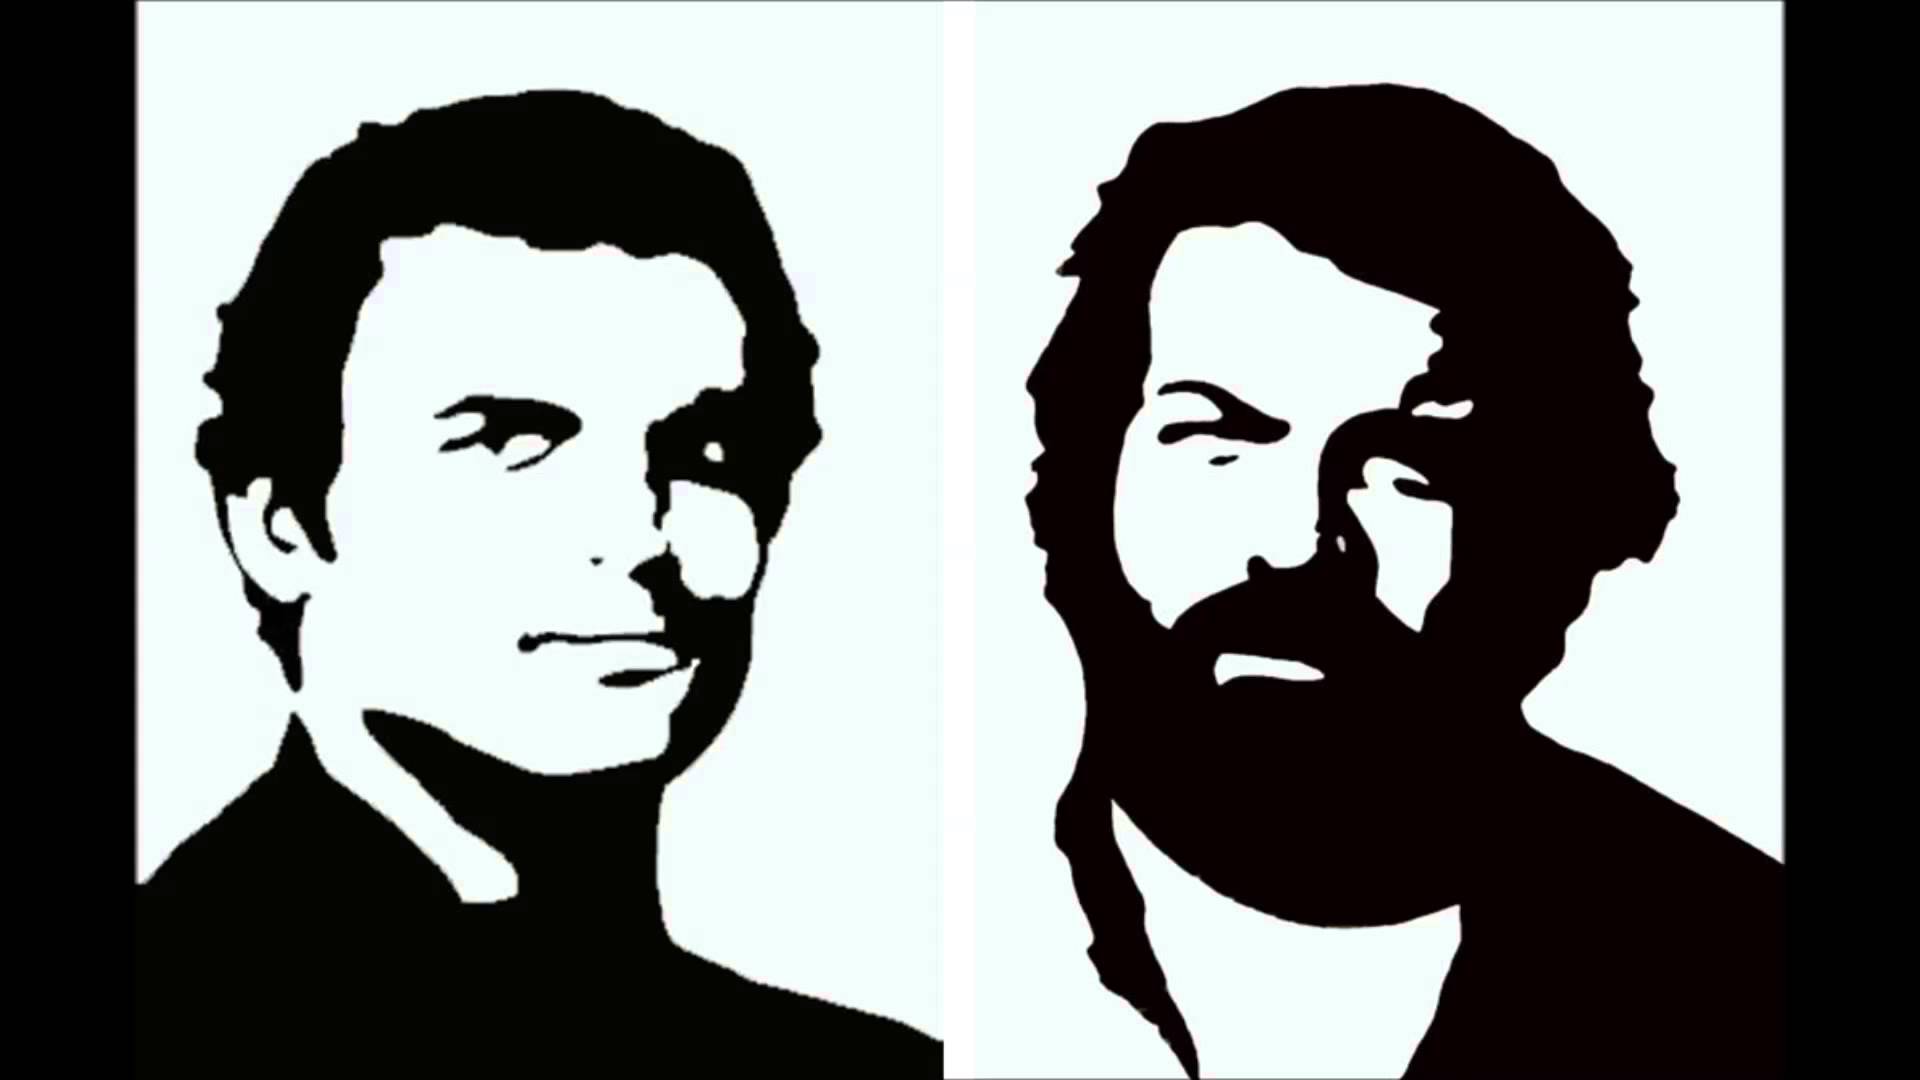 1920x1080px Bud Spencer Und Terence Hill (52.7 KB).07